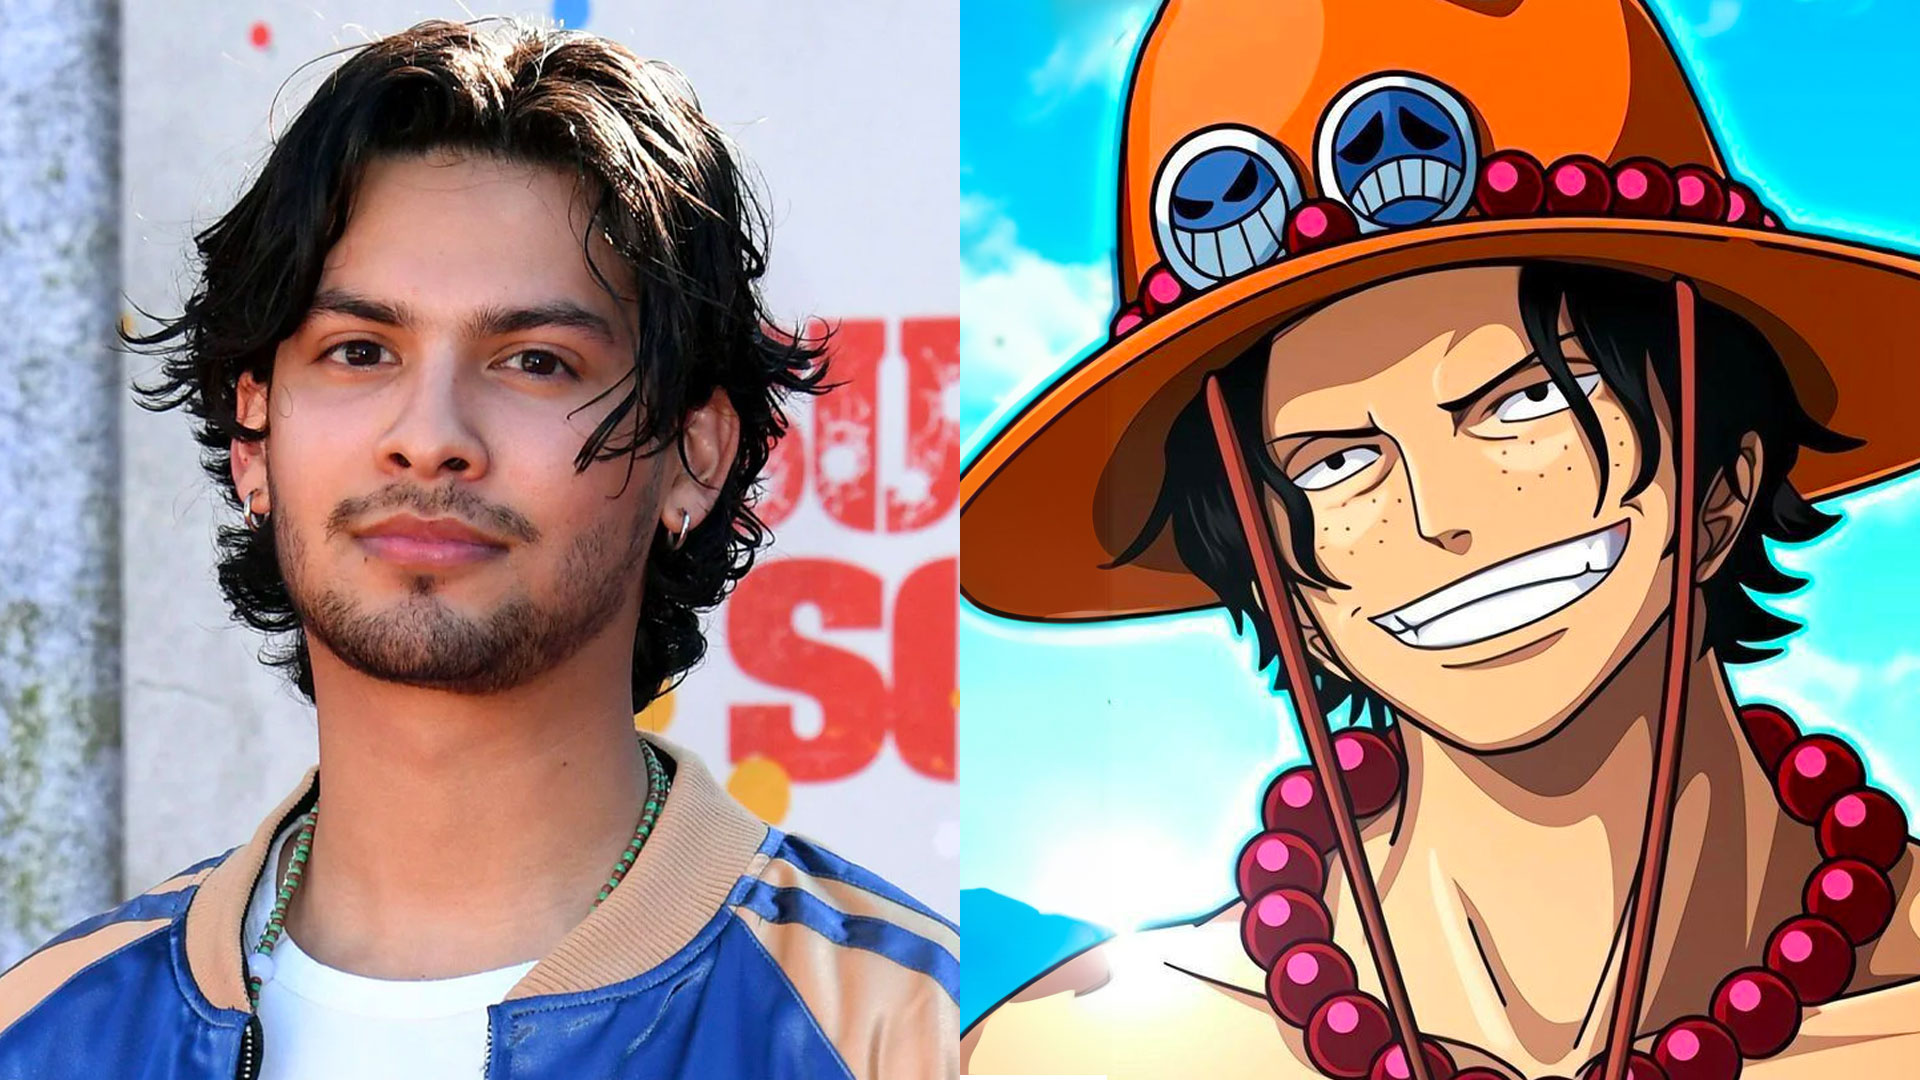 Many fans in the One Piece Community want Actor Xolo Maridueña to